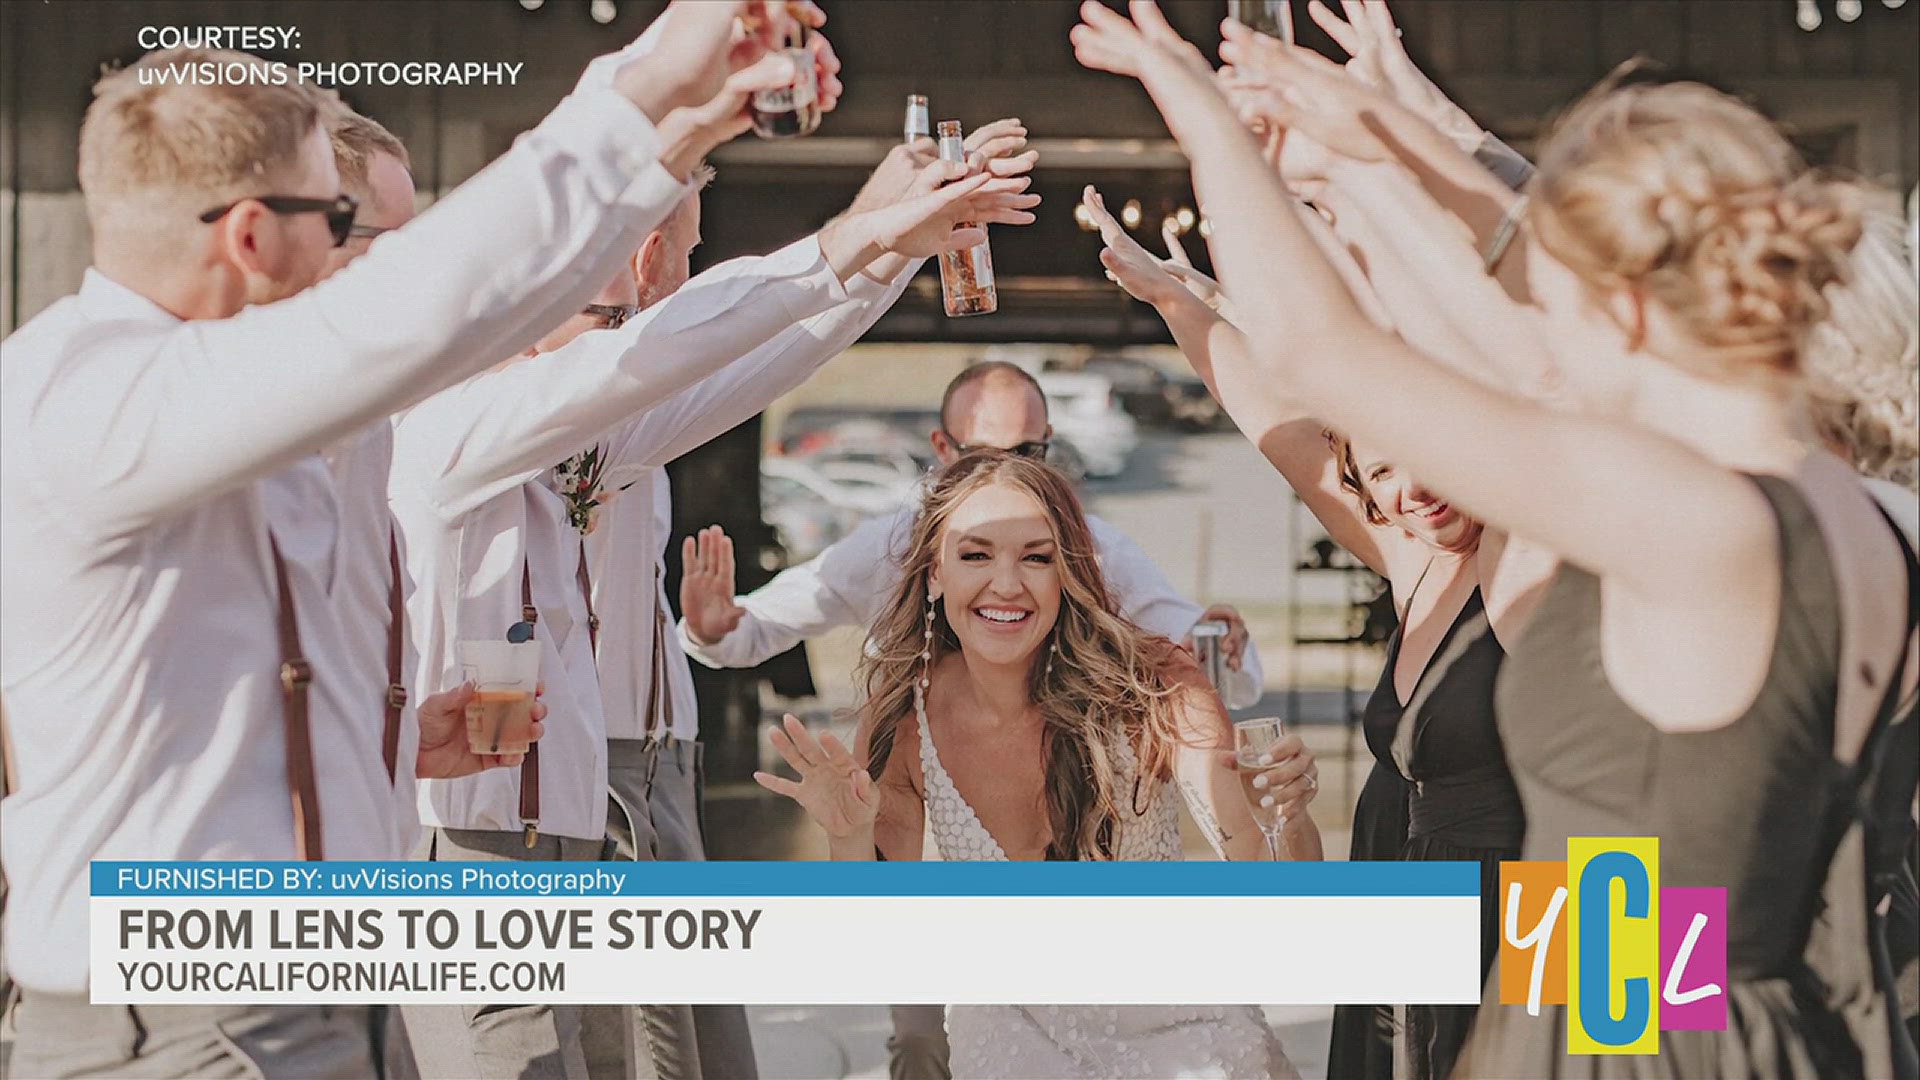 Get the latest on trending wedding photos. From a more traditional snapshot, to a documentary style approach that captures the little special moments in between.